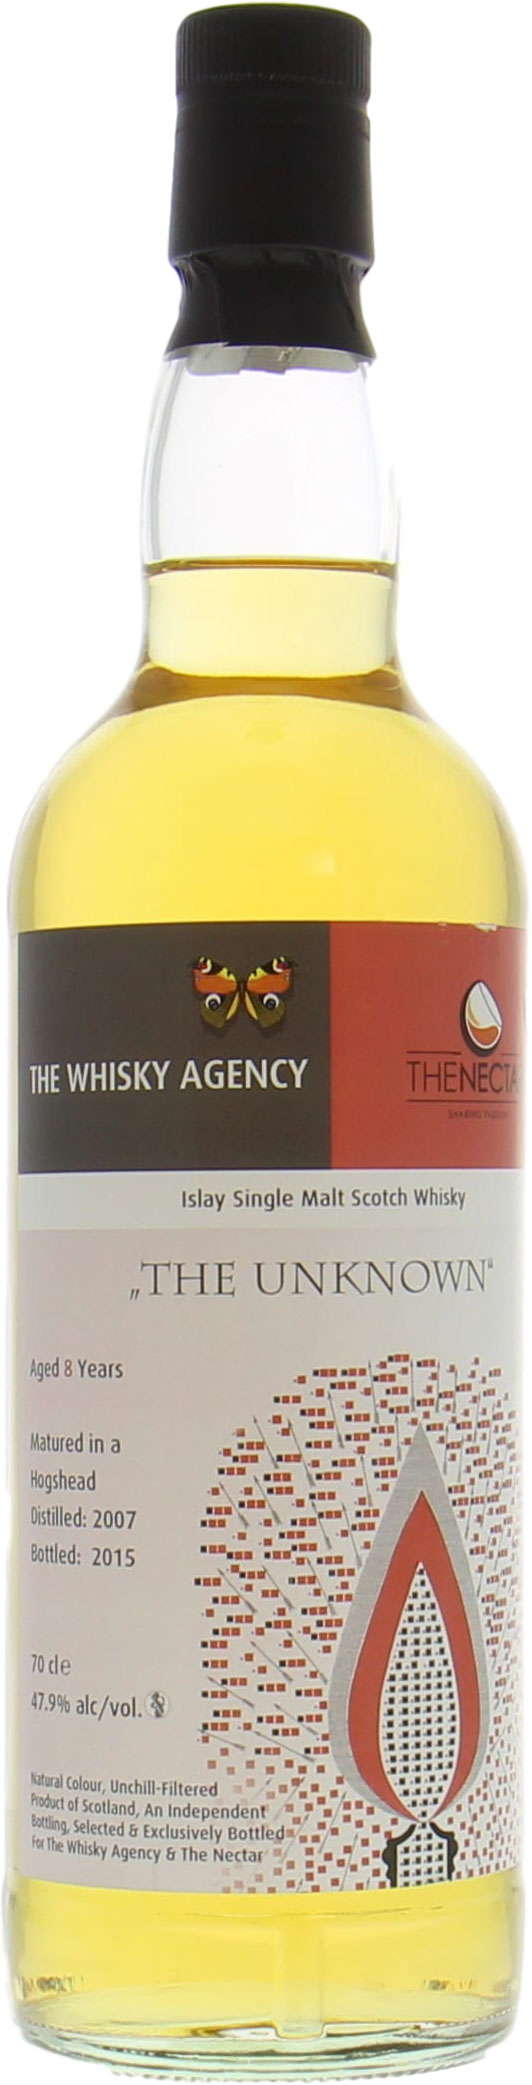 The Whisky Agency - 8 Years Old Islay The Unknown 47.9% 2007 Perfect